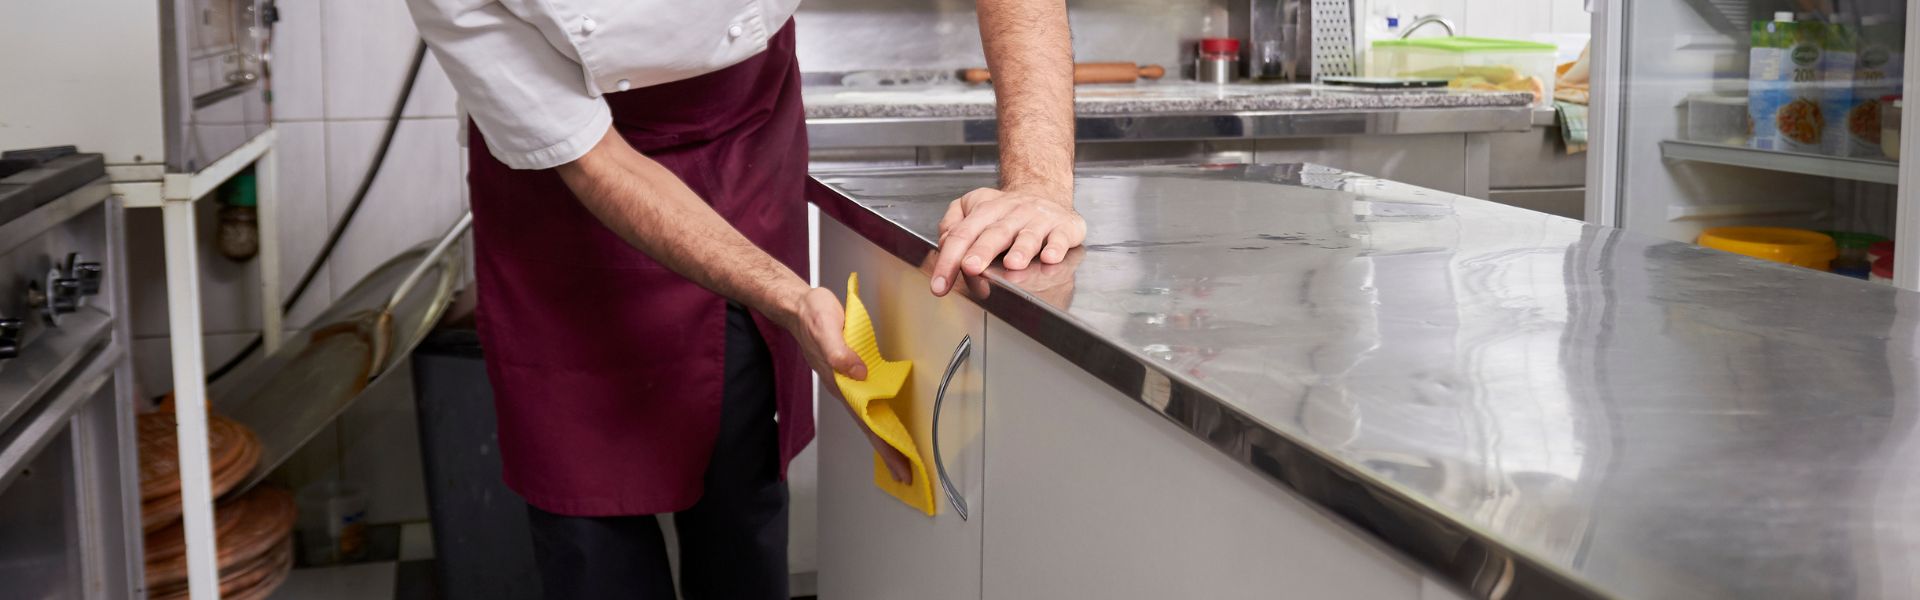 Restaurant Cleaning: The Ultimate Guide And When to Hire a Professional